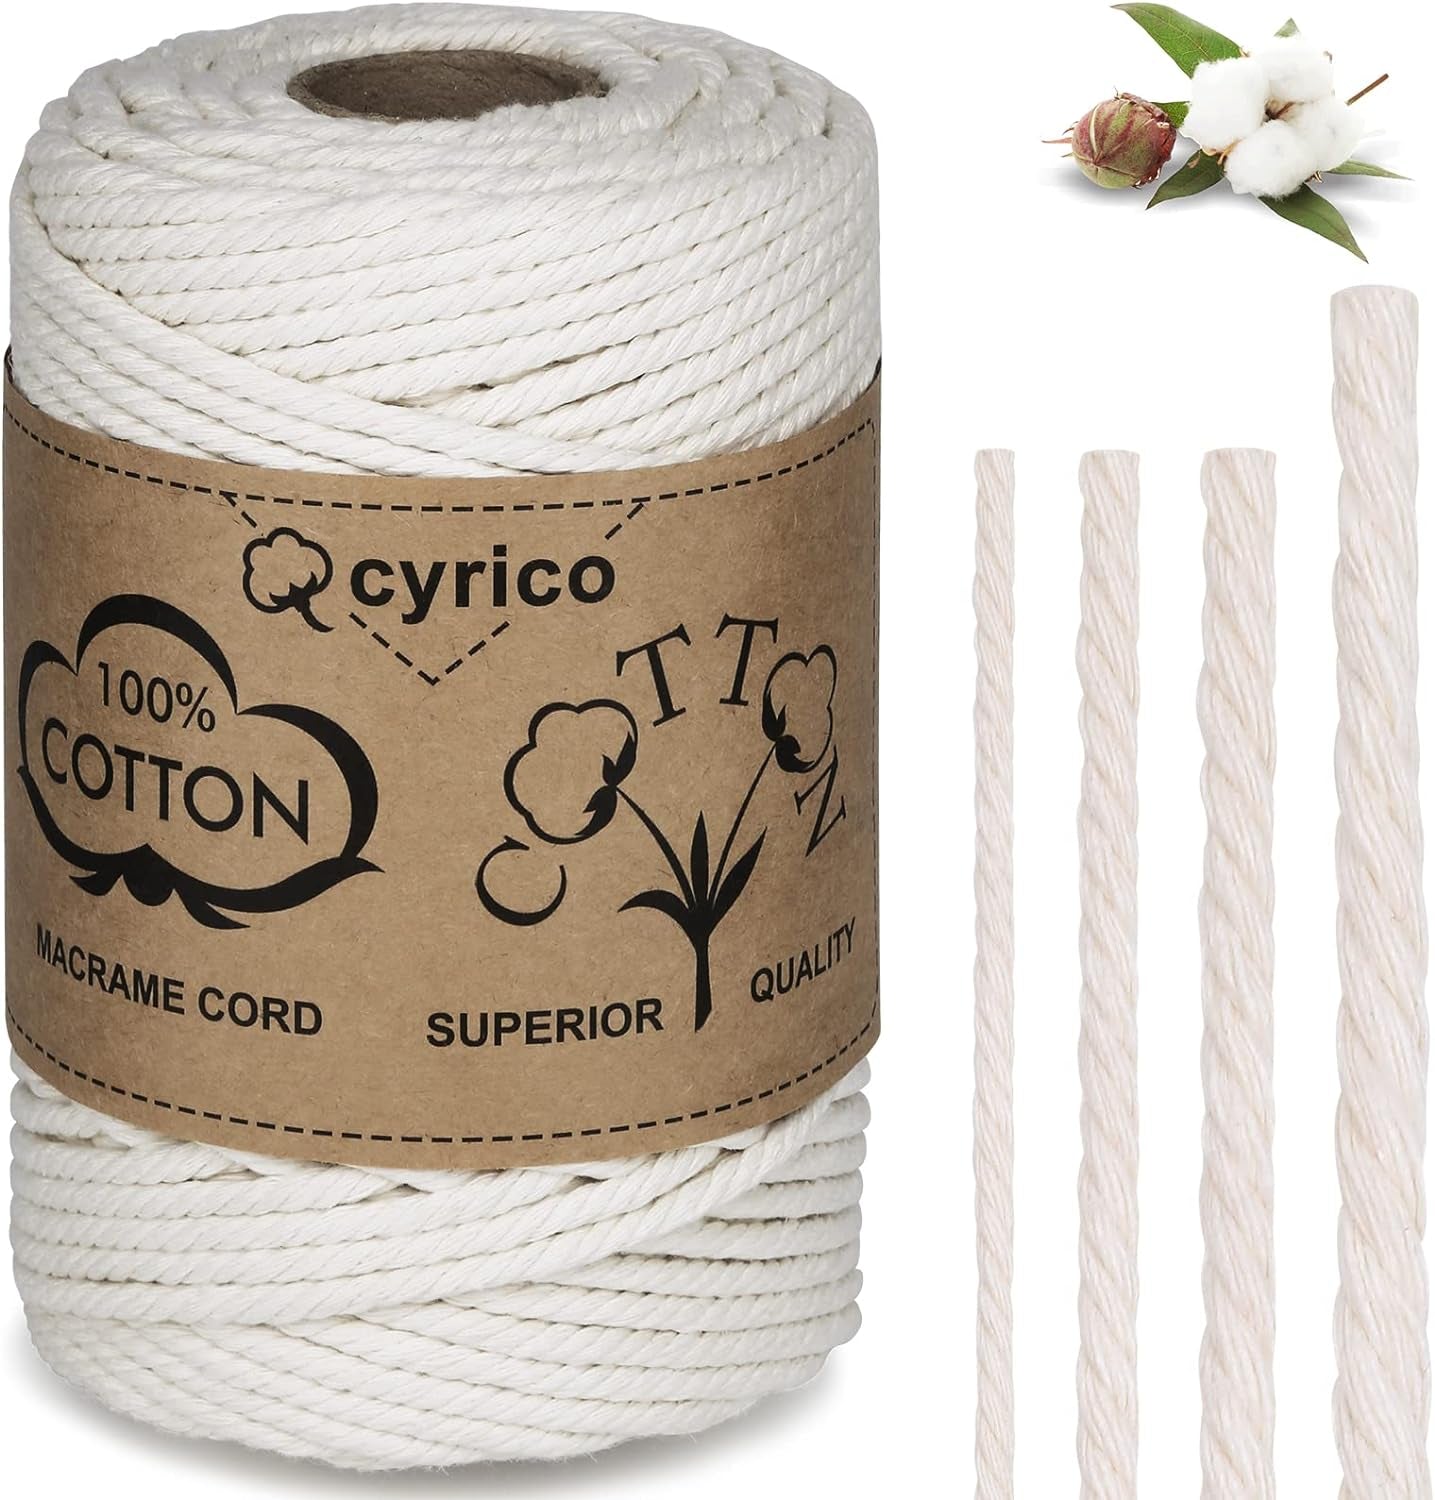 Macrame Cord 3Mm X 300 Yards, 100% Natural Cotton Cord Macrame Rope - Twisted Macrame String Supplies for Wall Hanging Plant Hangers Gift Wrapping Wedding Decorations